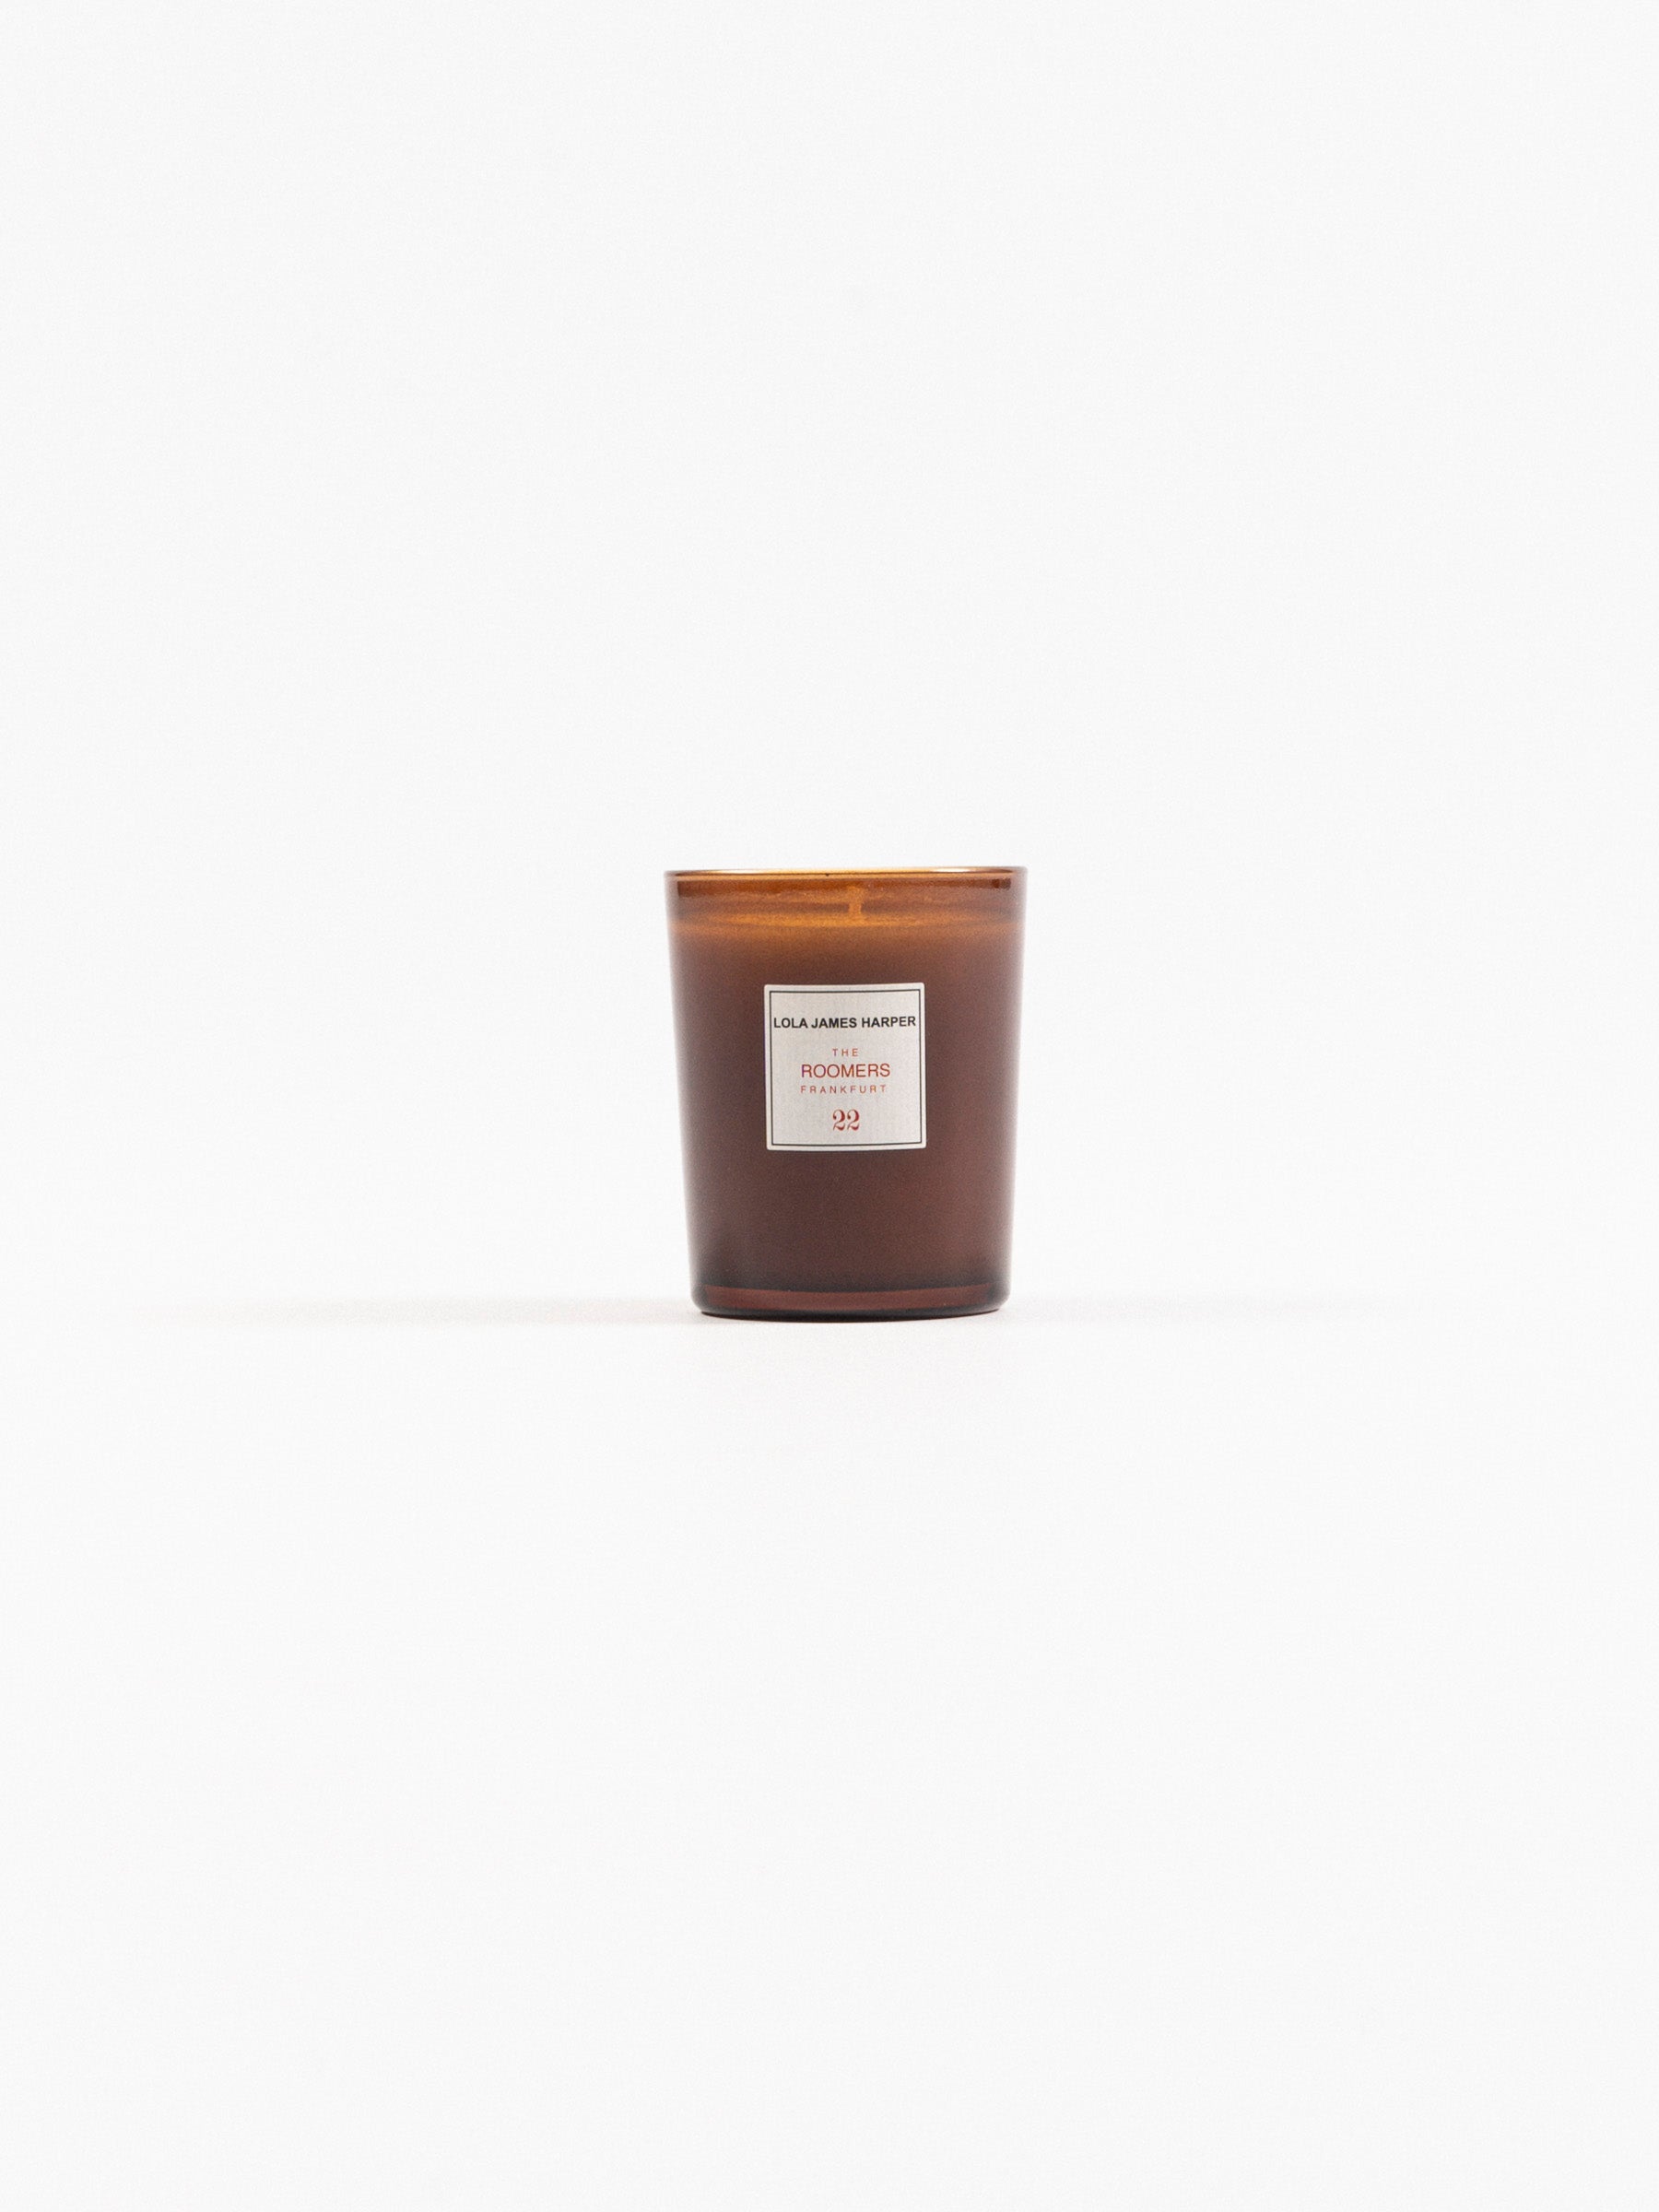 Roomers Frankfurt Scent Candle